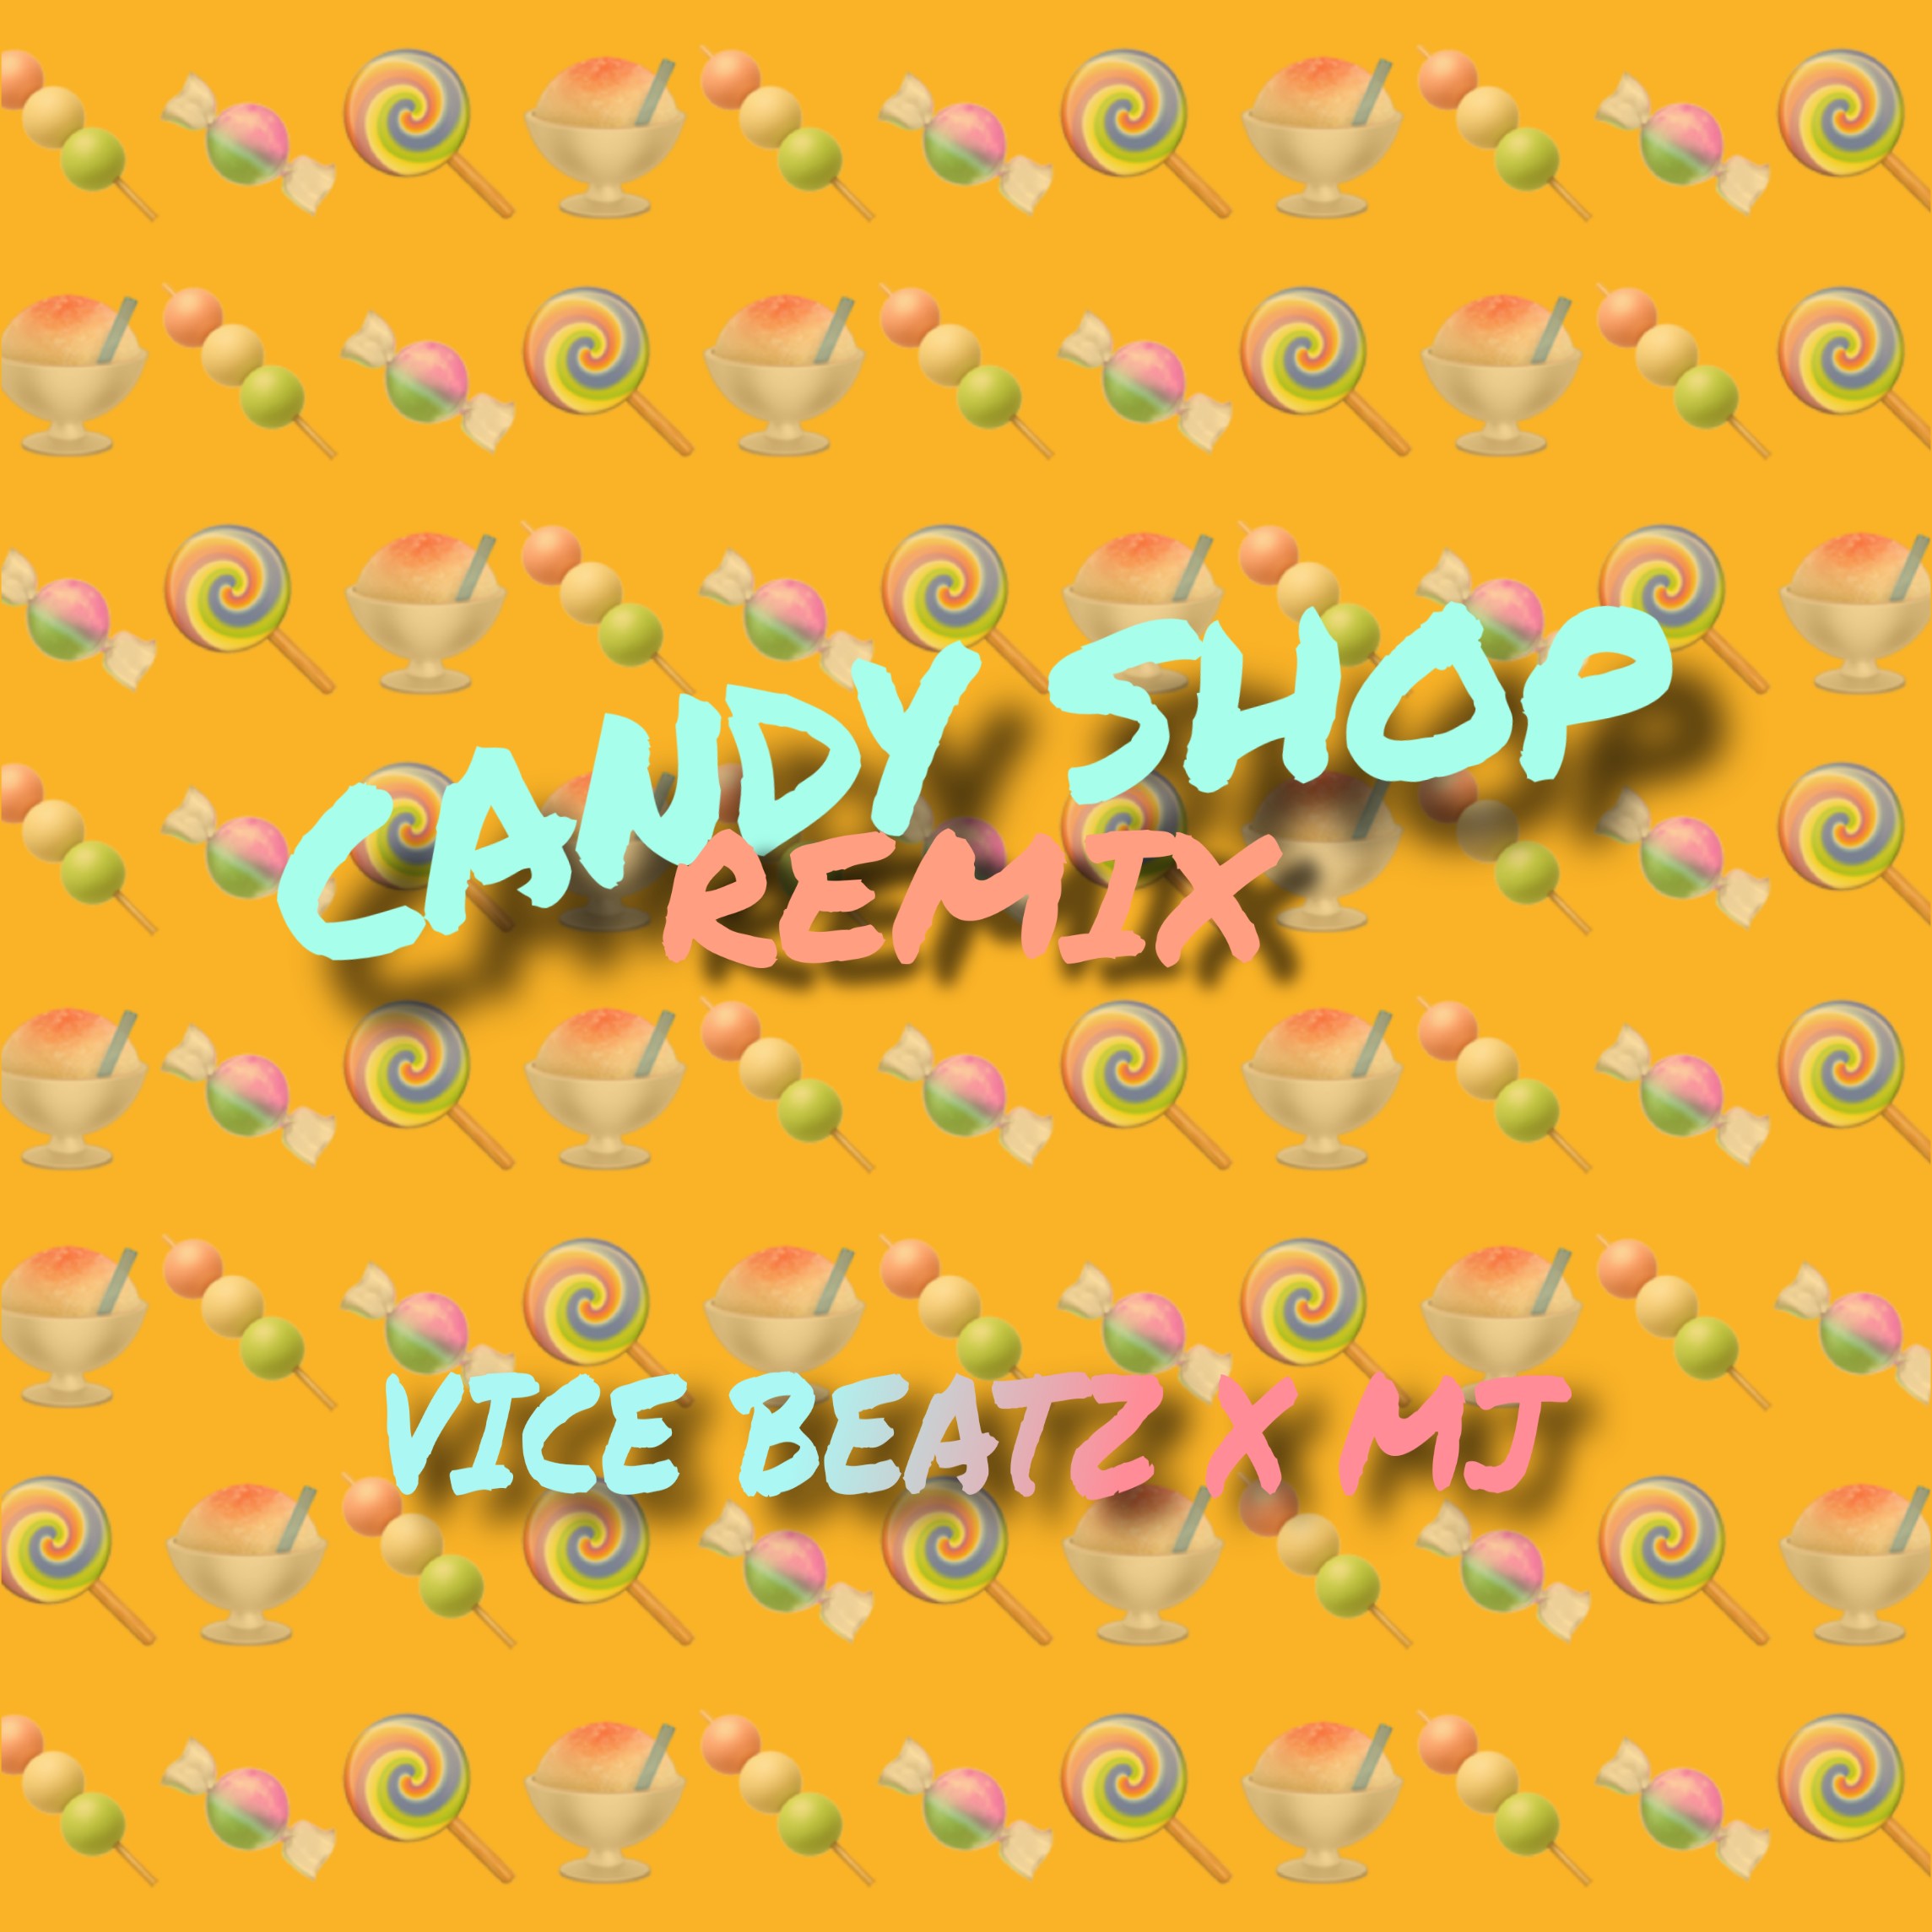 Lae alla Candy Shop (Vice_Beatz & MJ Remix)_ CLICK ON 'BUY' For Free Download